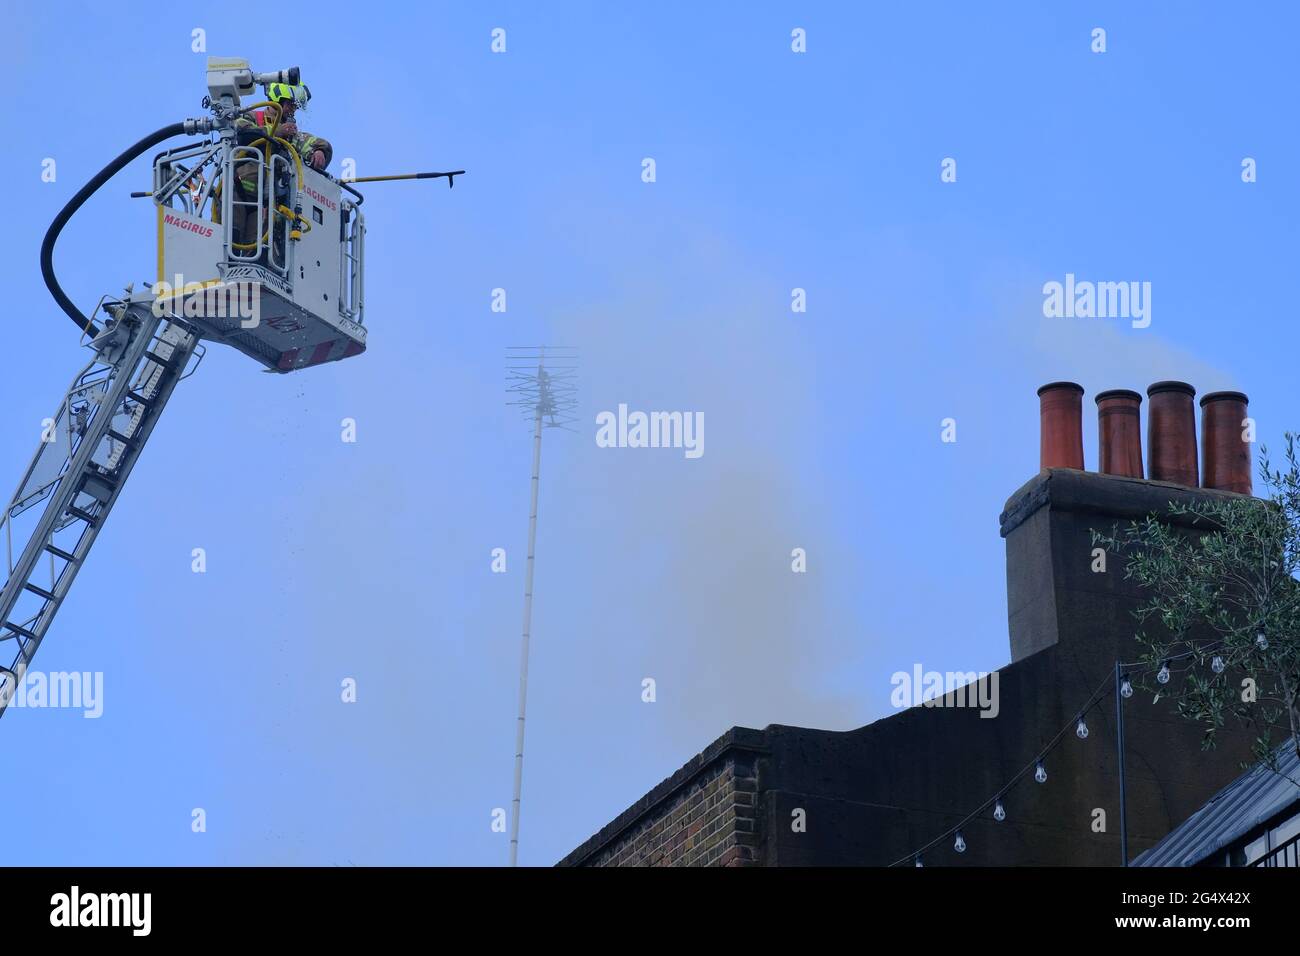 Firefighters on a hydraulic platform tackle a fire at a pub owned by Guy Ritchie, by piercing holes in the roof and directing water at the chimney Stock Photo